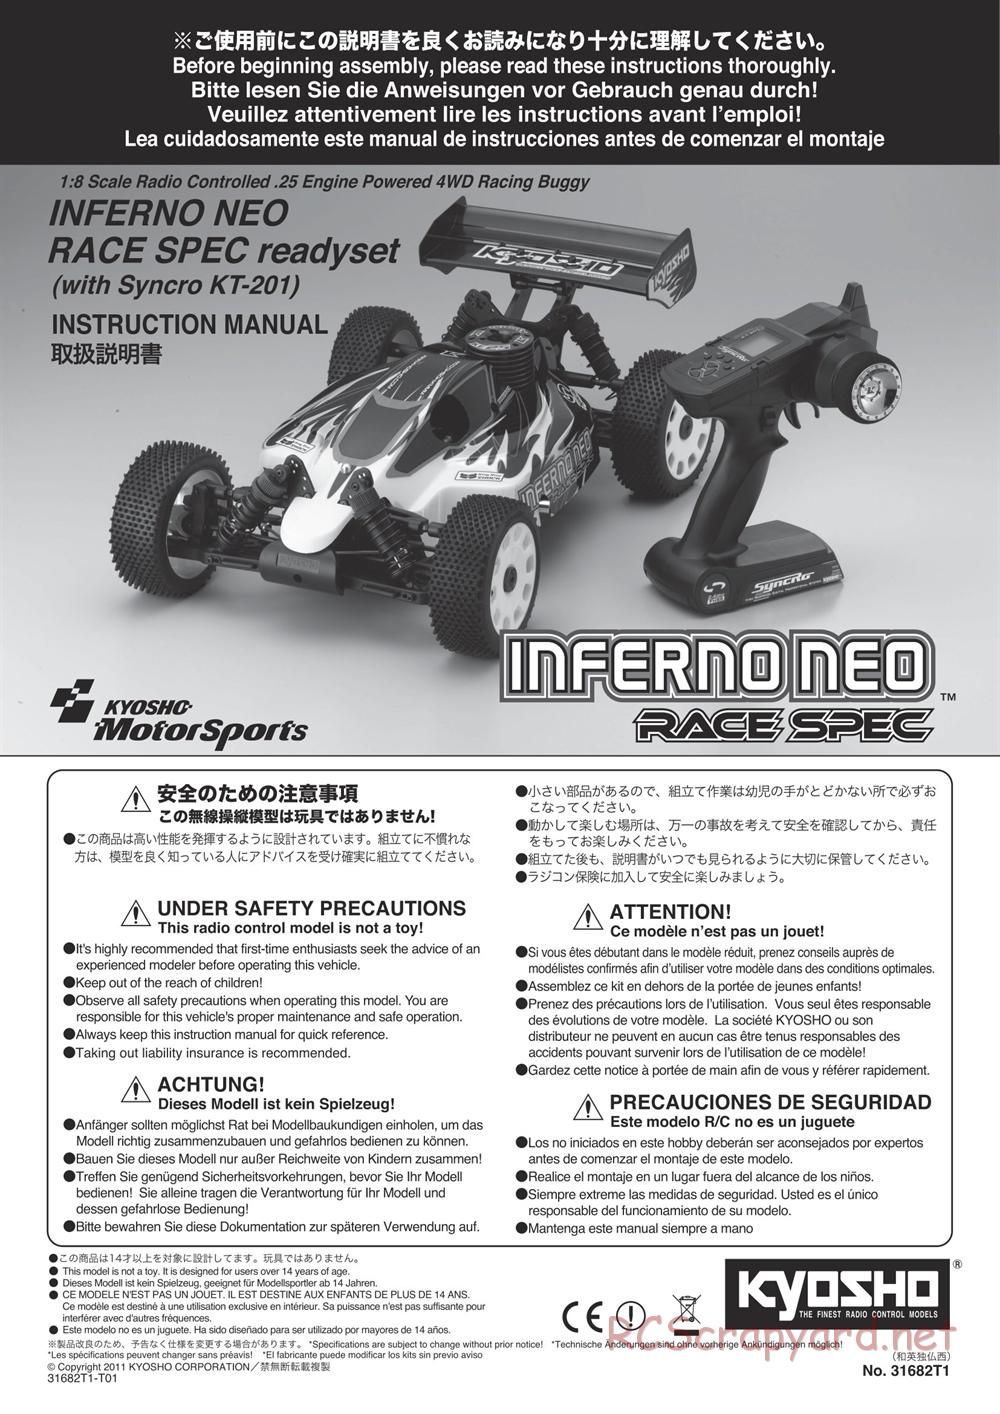 Kyosho - Inferno Neo Race Spec - Manual - Page 1